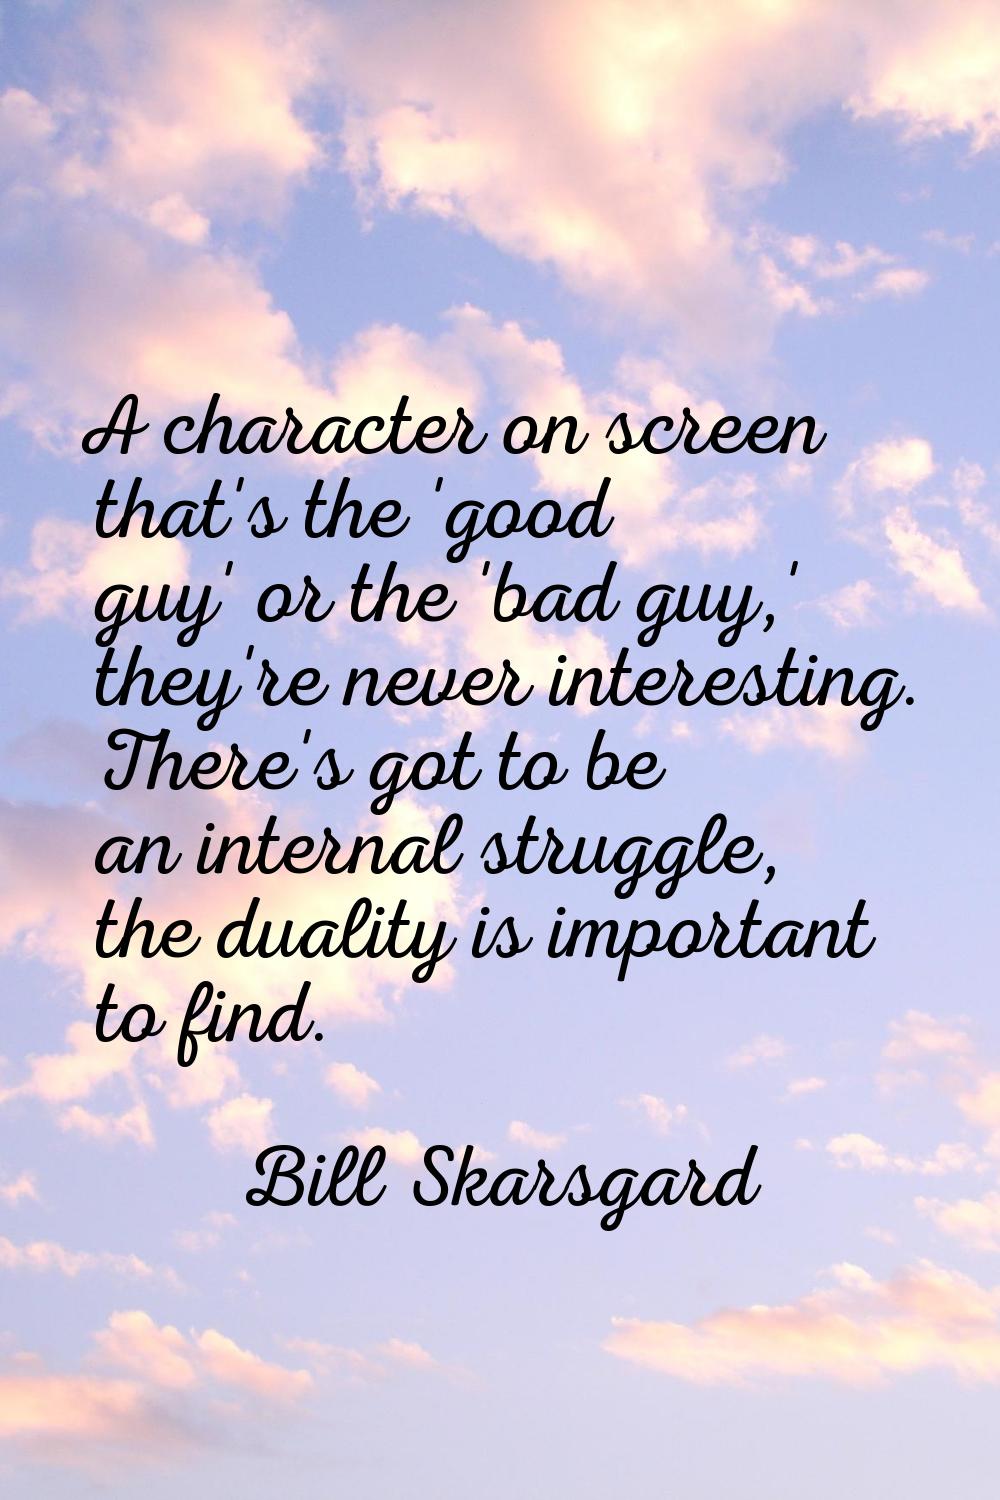 A character on screen that's the 'good guy' or the 'bad guy,' they're never interesting. There's go